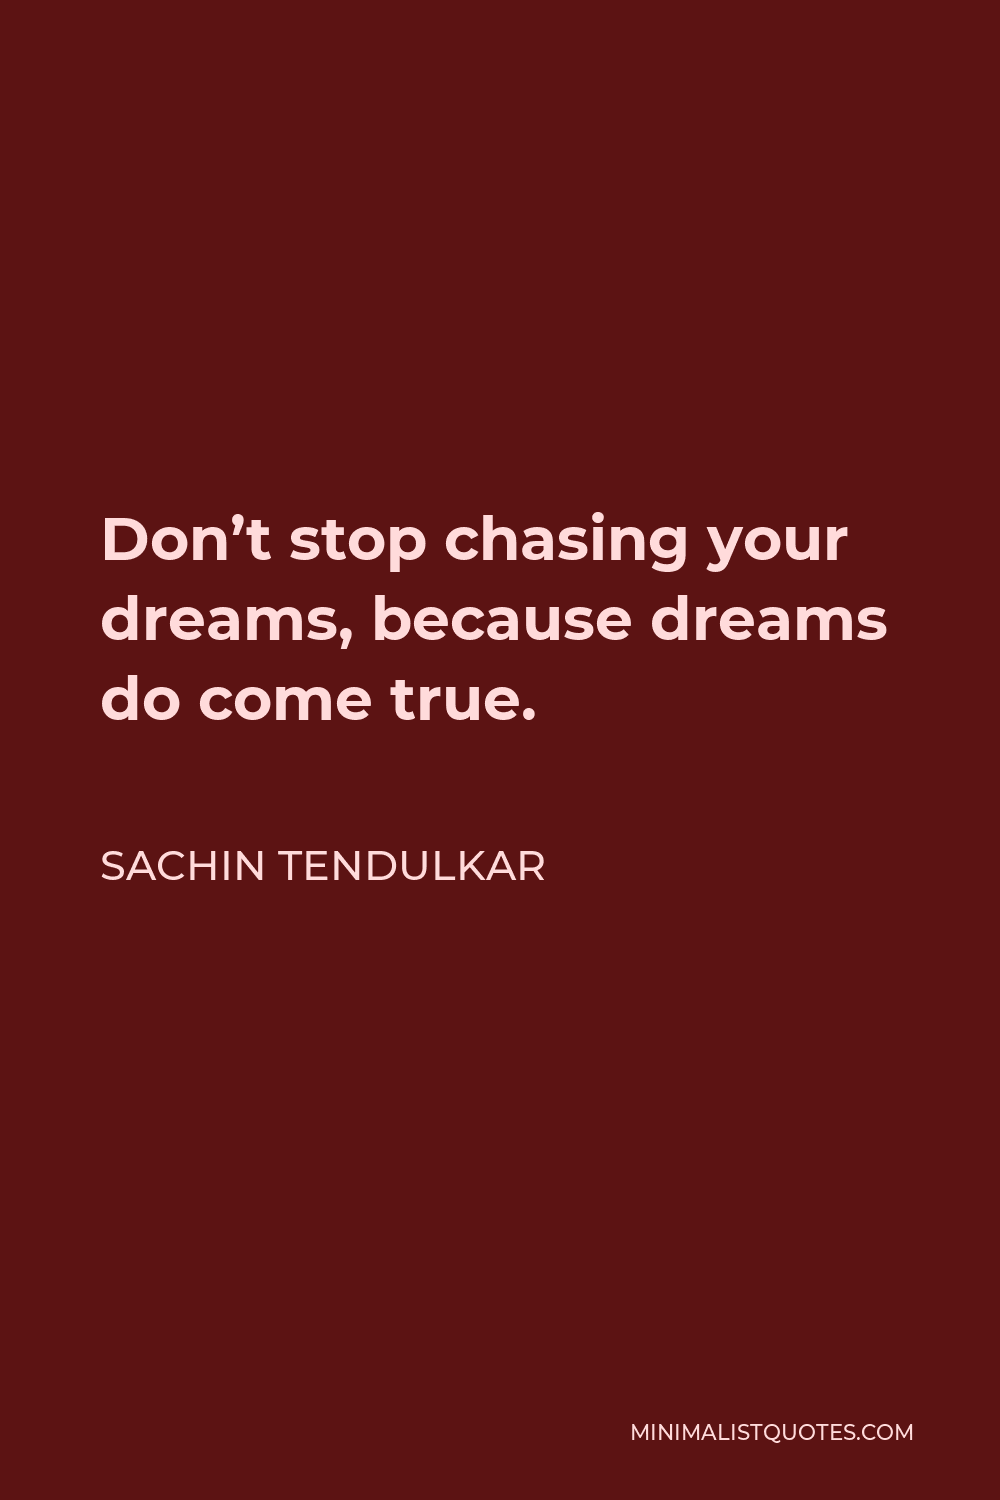 chase your dreams quotes sachin